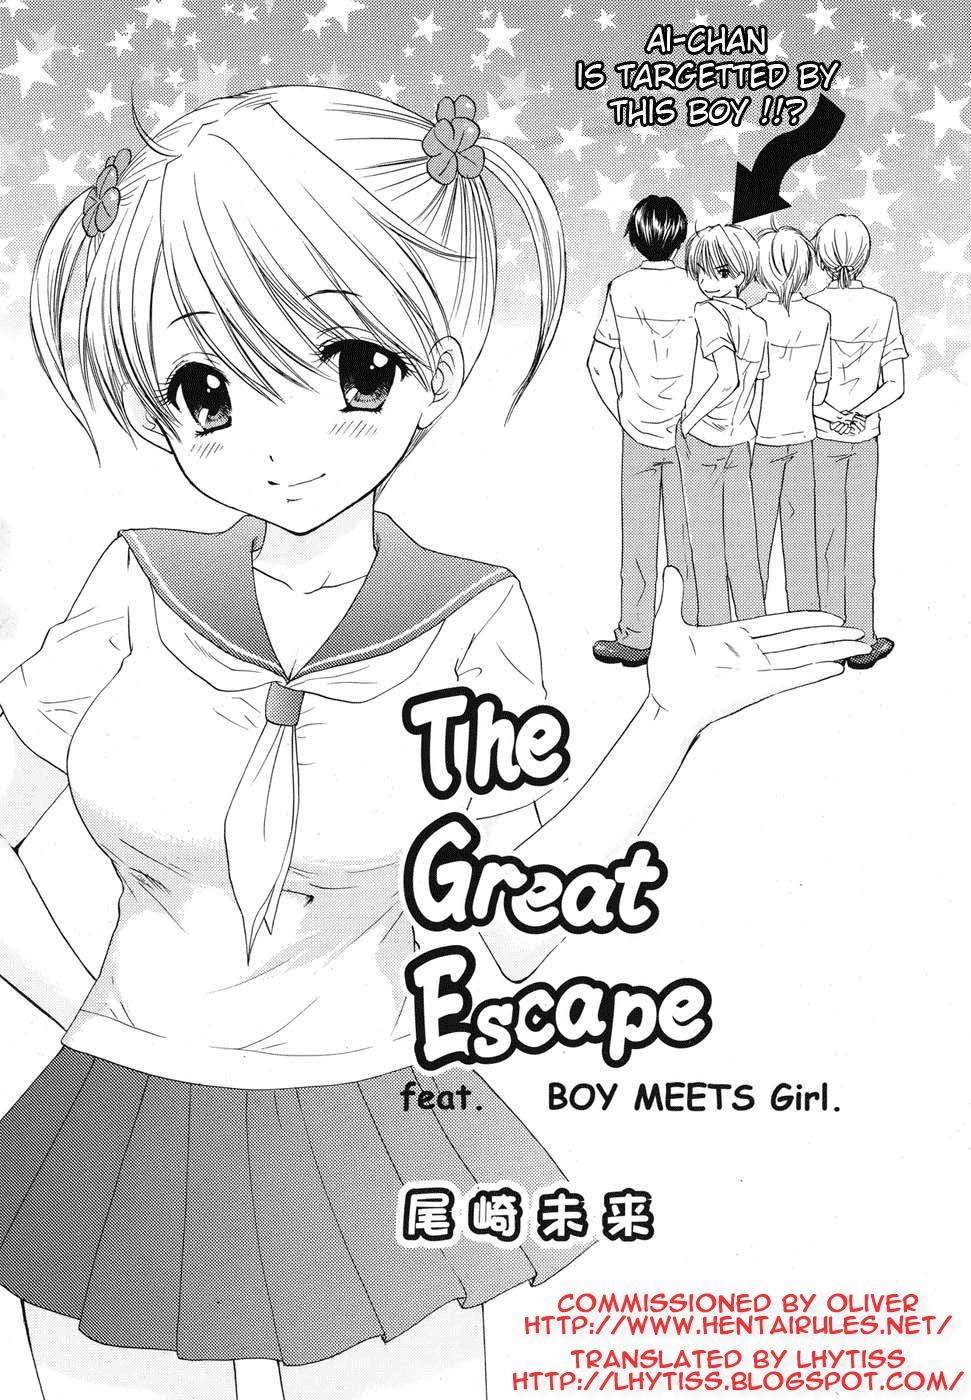 [Miray Ozaki] The Great Escape Feat. Boy Meets Girl [English] [Hentairules] page 2 full